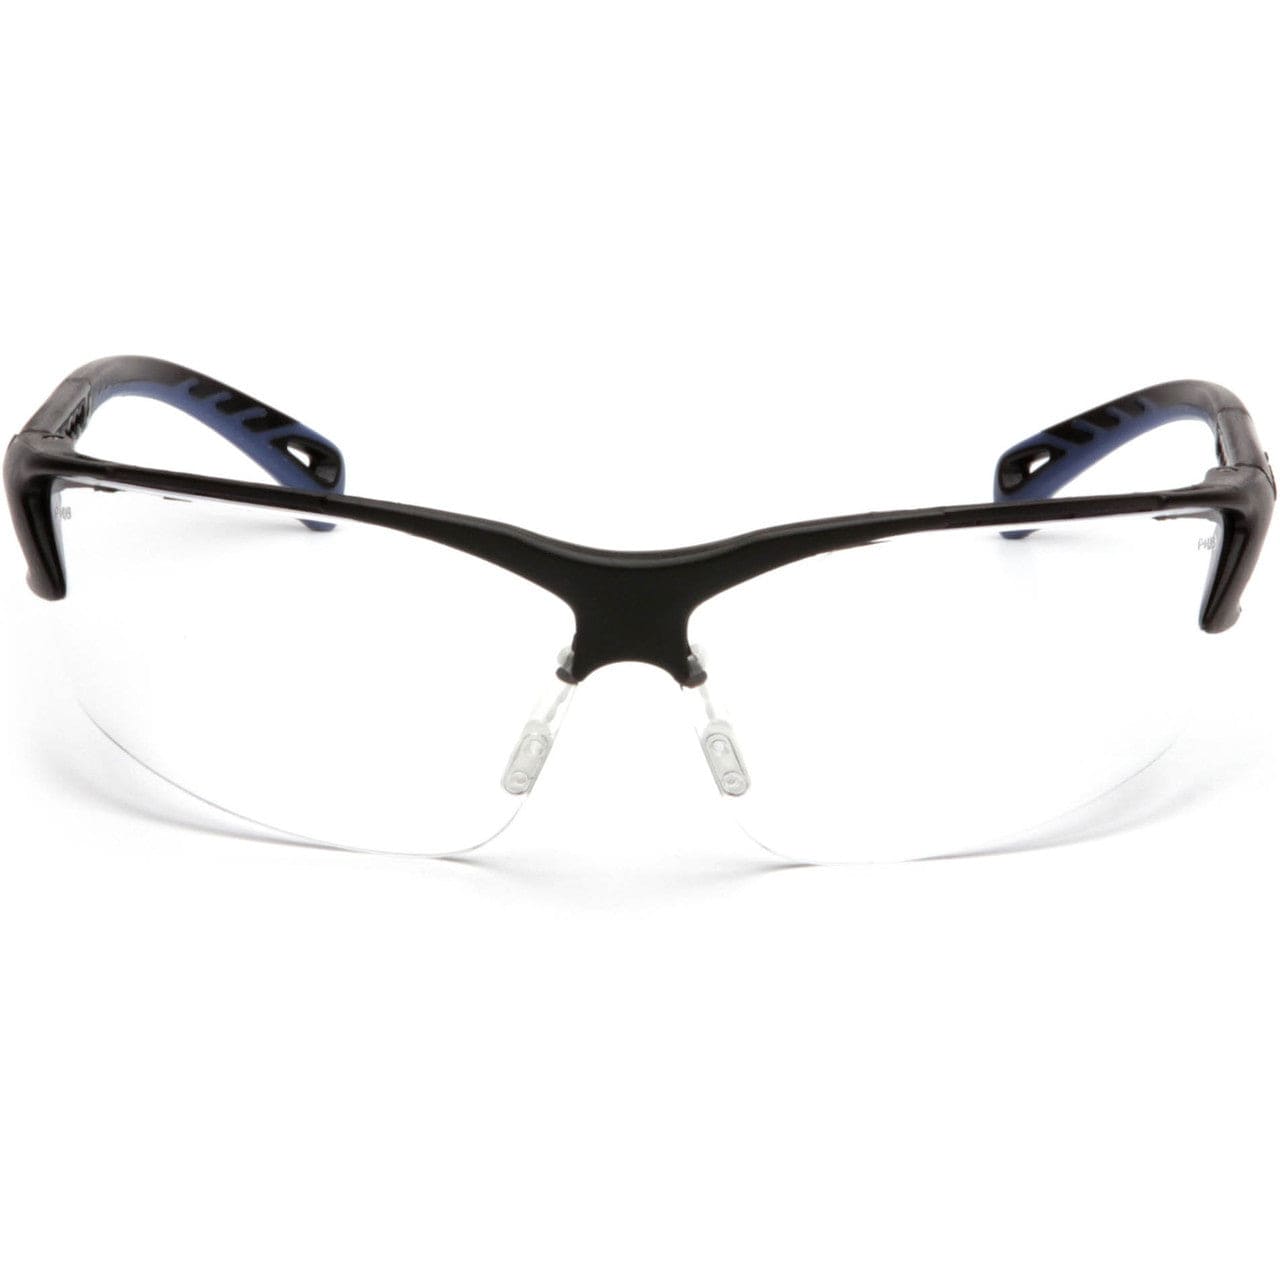 Pyramex Venture 3 Safety Glasses with Black Frame and Clear Anti-Fog Lens SB5710DT Front View